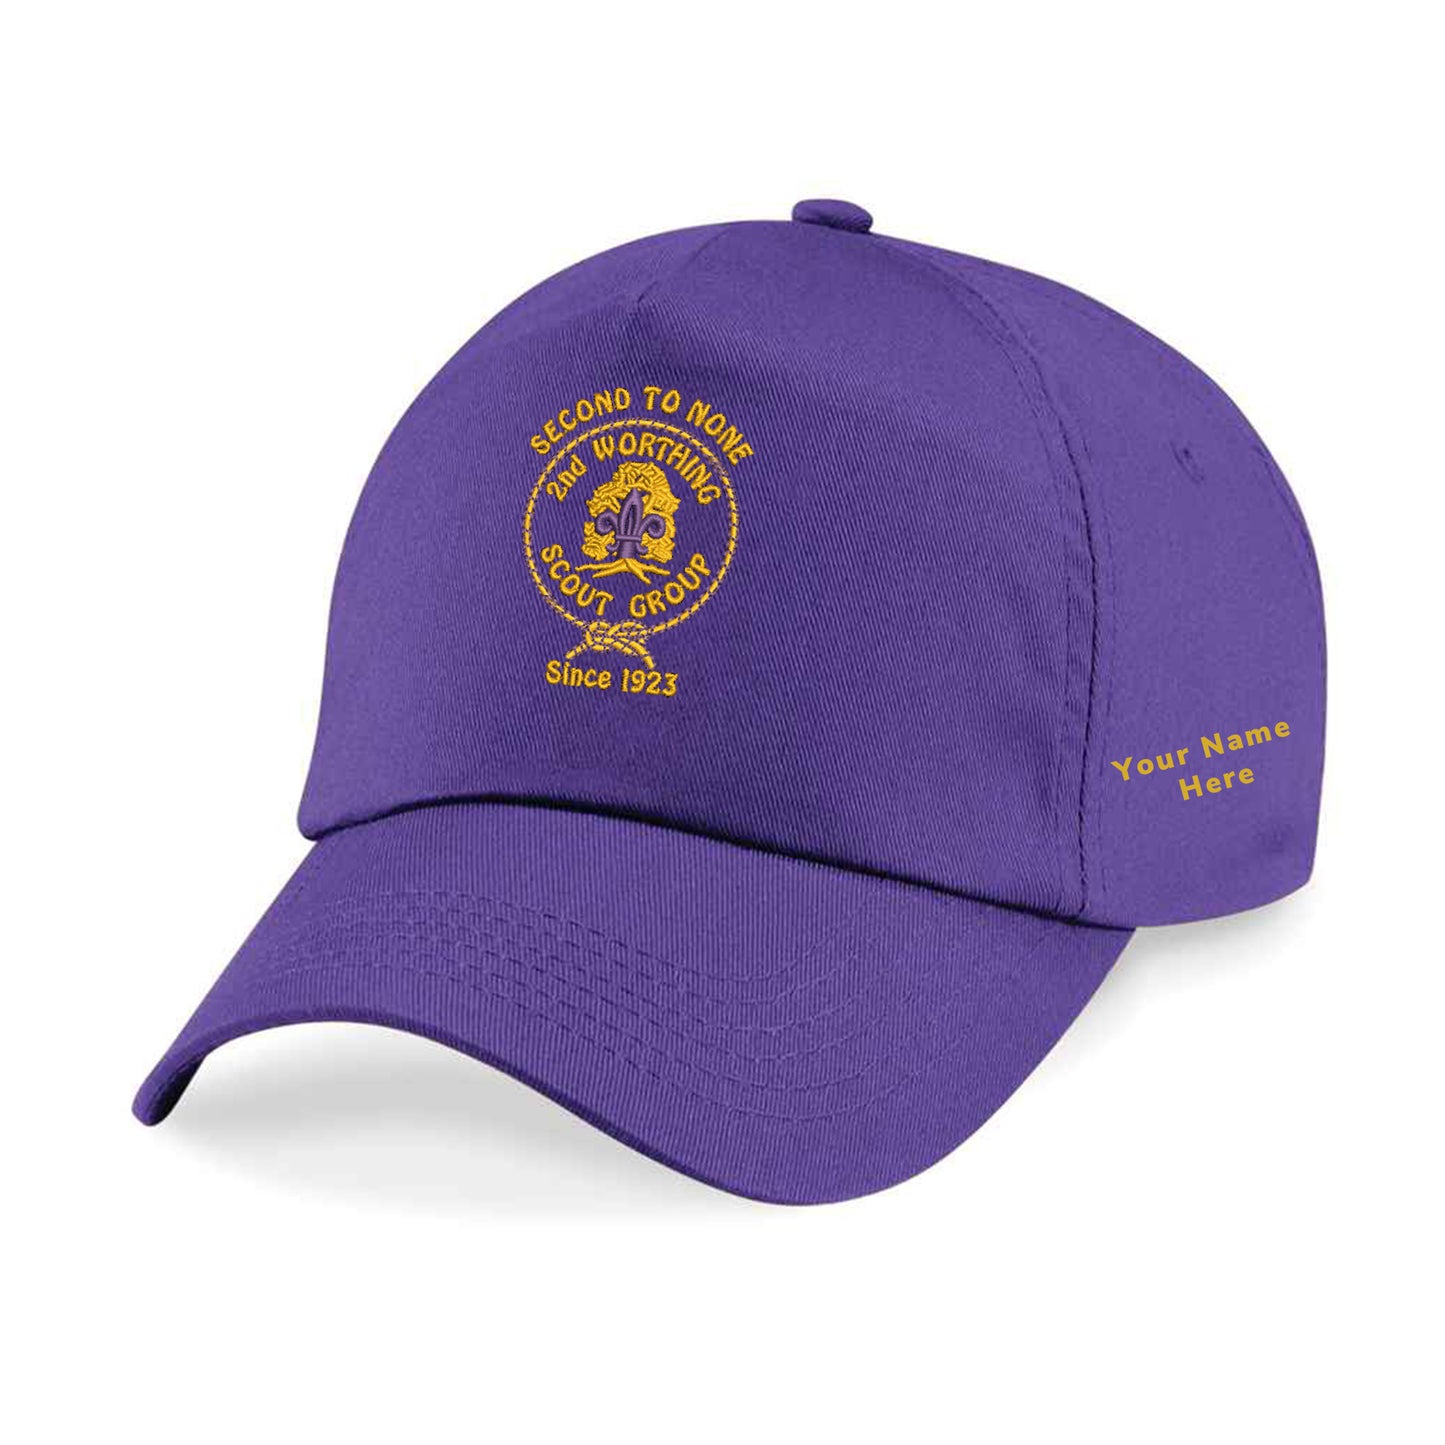 2nd Worthing Scouts Embroidered Cap(One size)